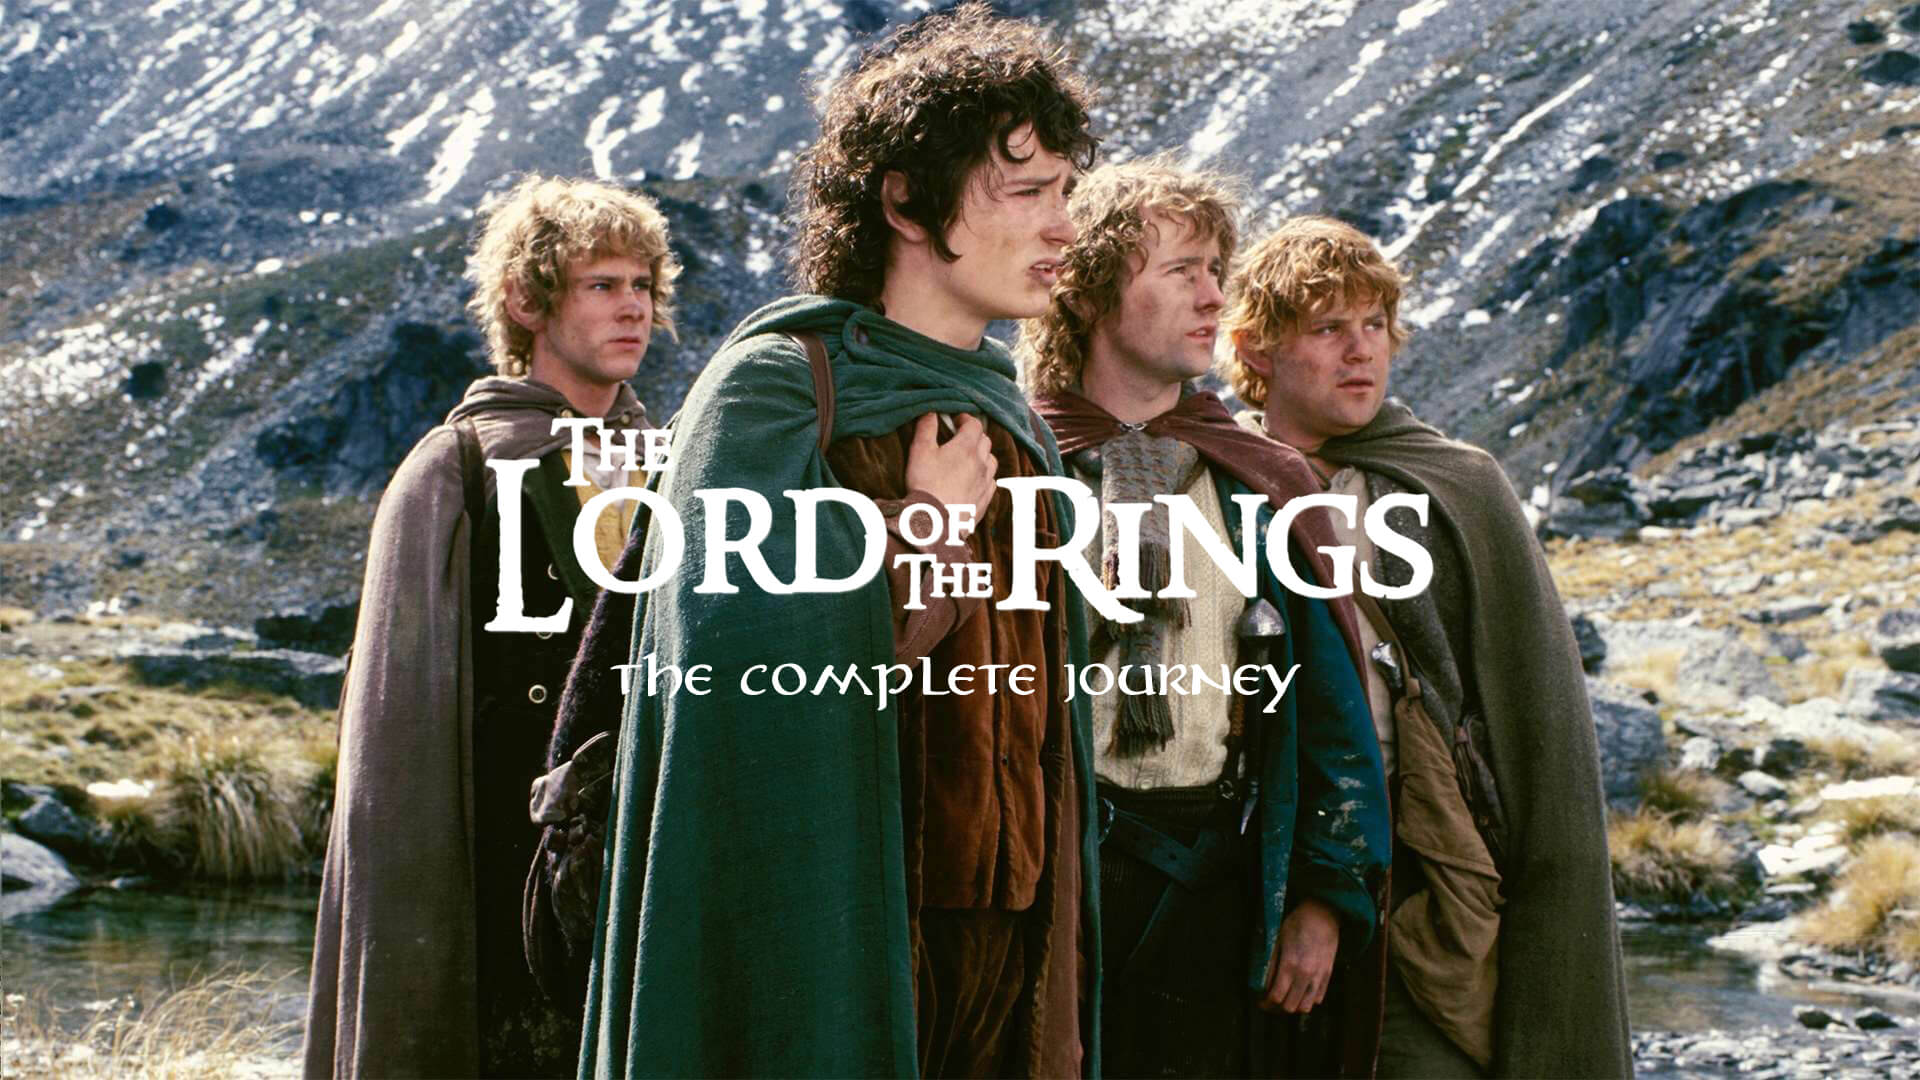 Lord of the Rings: The Fellowship of the Ring is now on Netflix, the  fellowship of the ring oscars - thirstymag.com